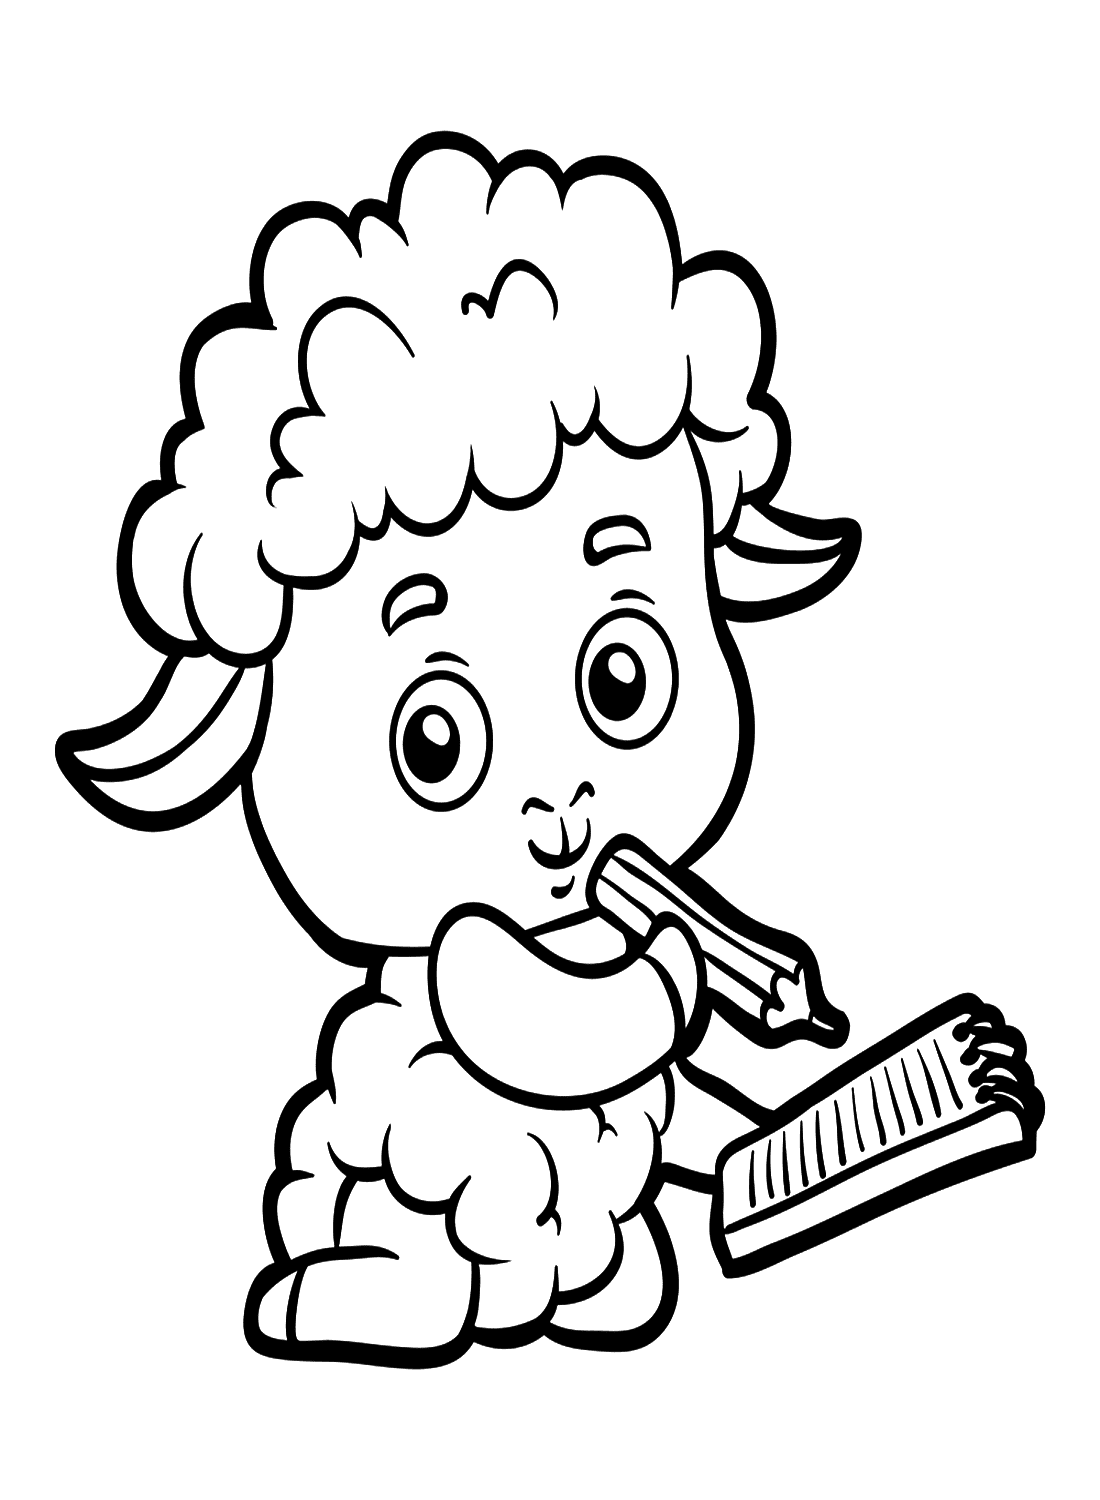 Lamb Writing With A Pencil from Lamb